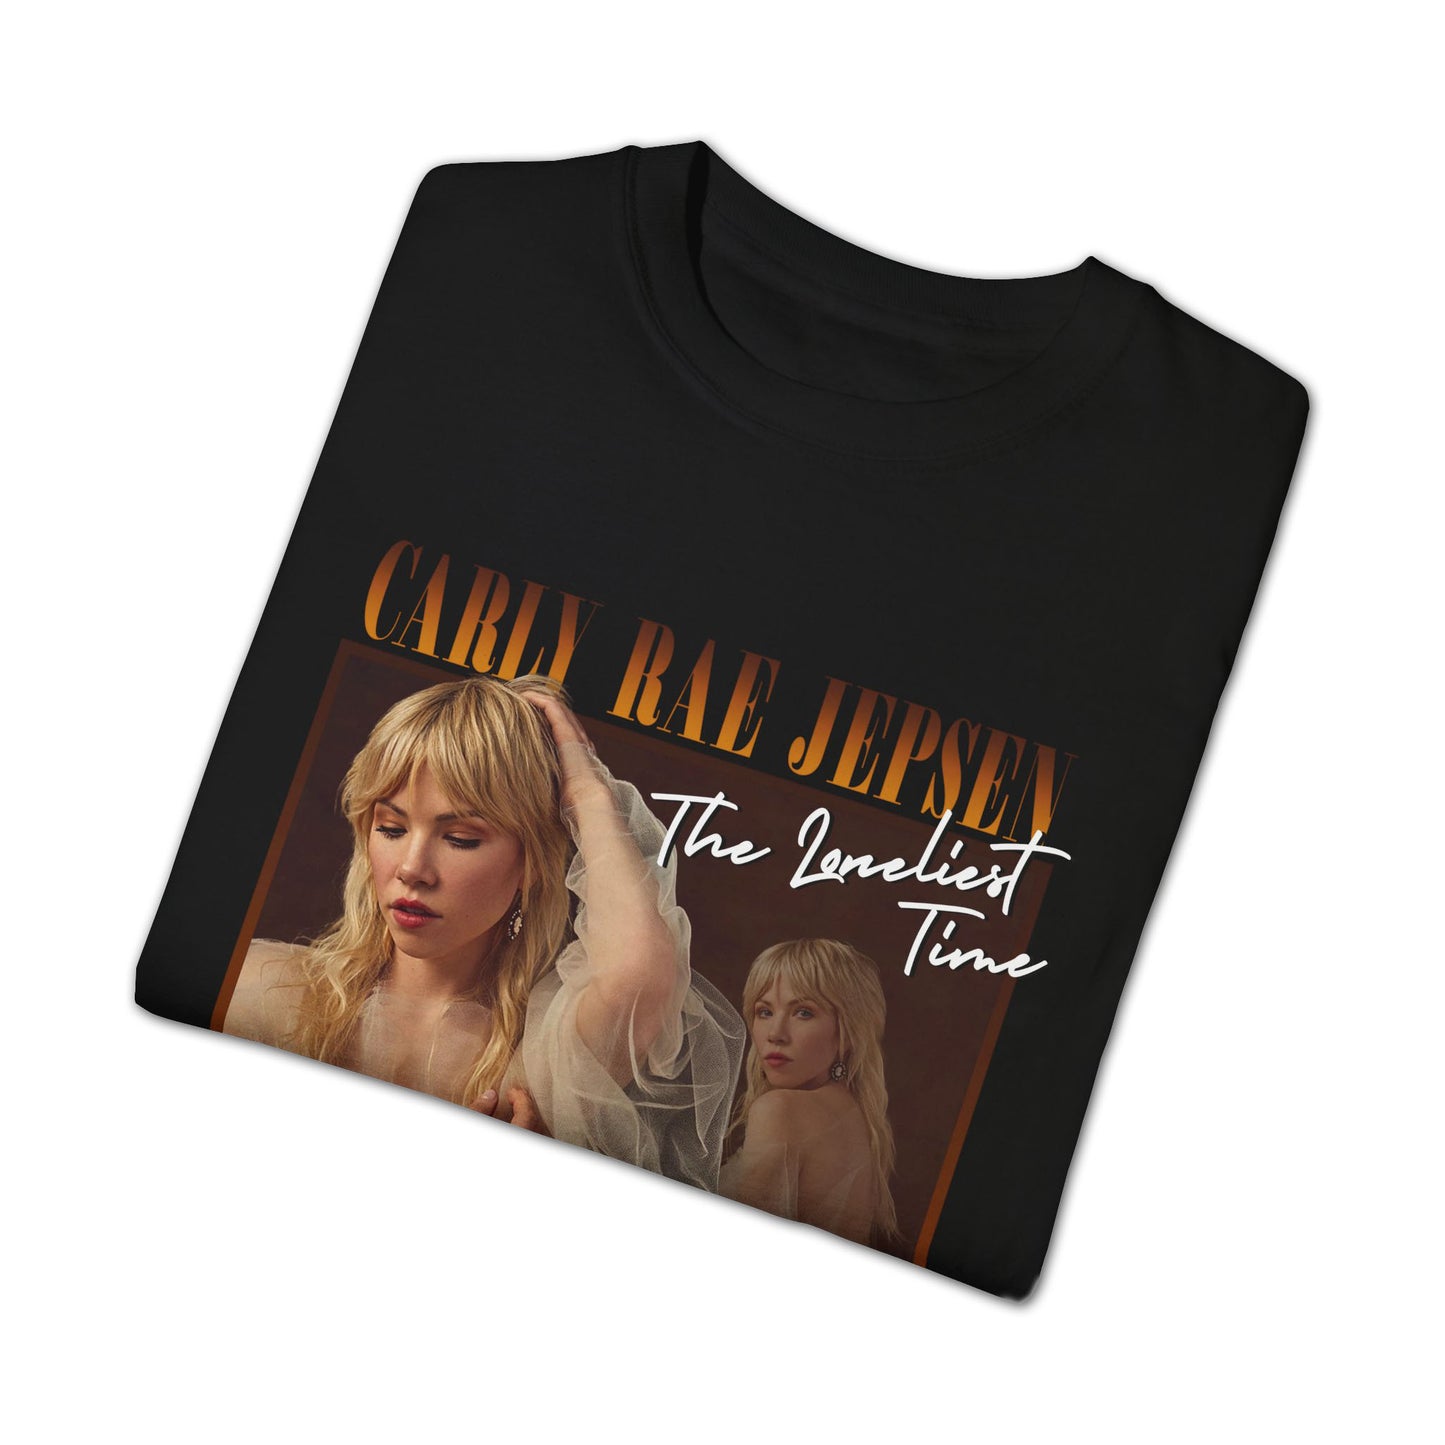 carly rae jepsen – the loneliest time unisex t-shirt